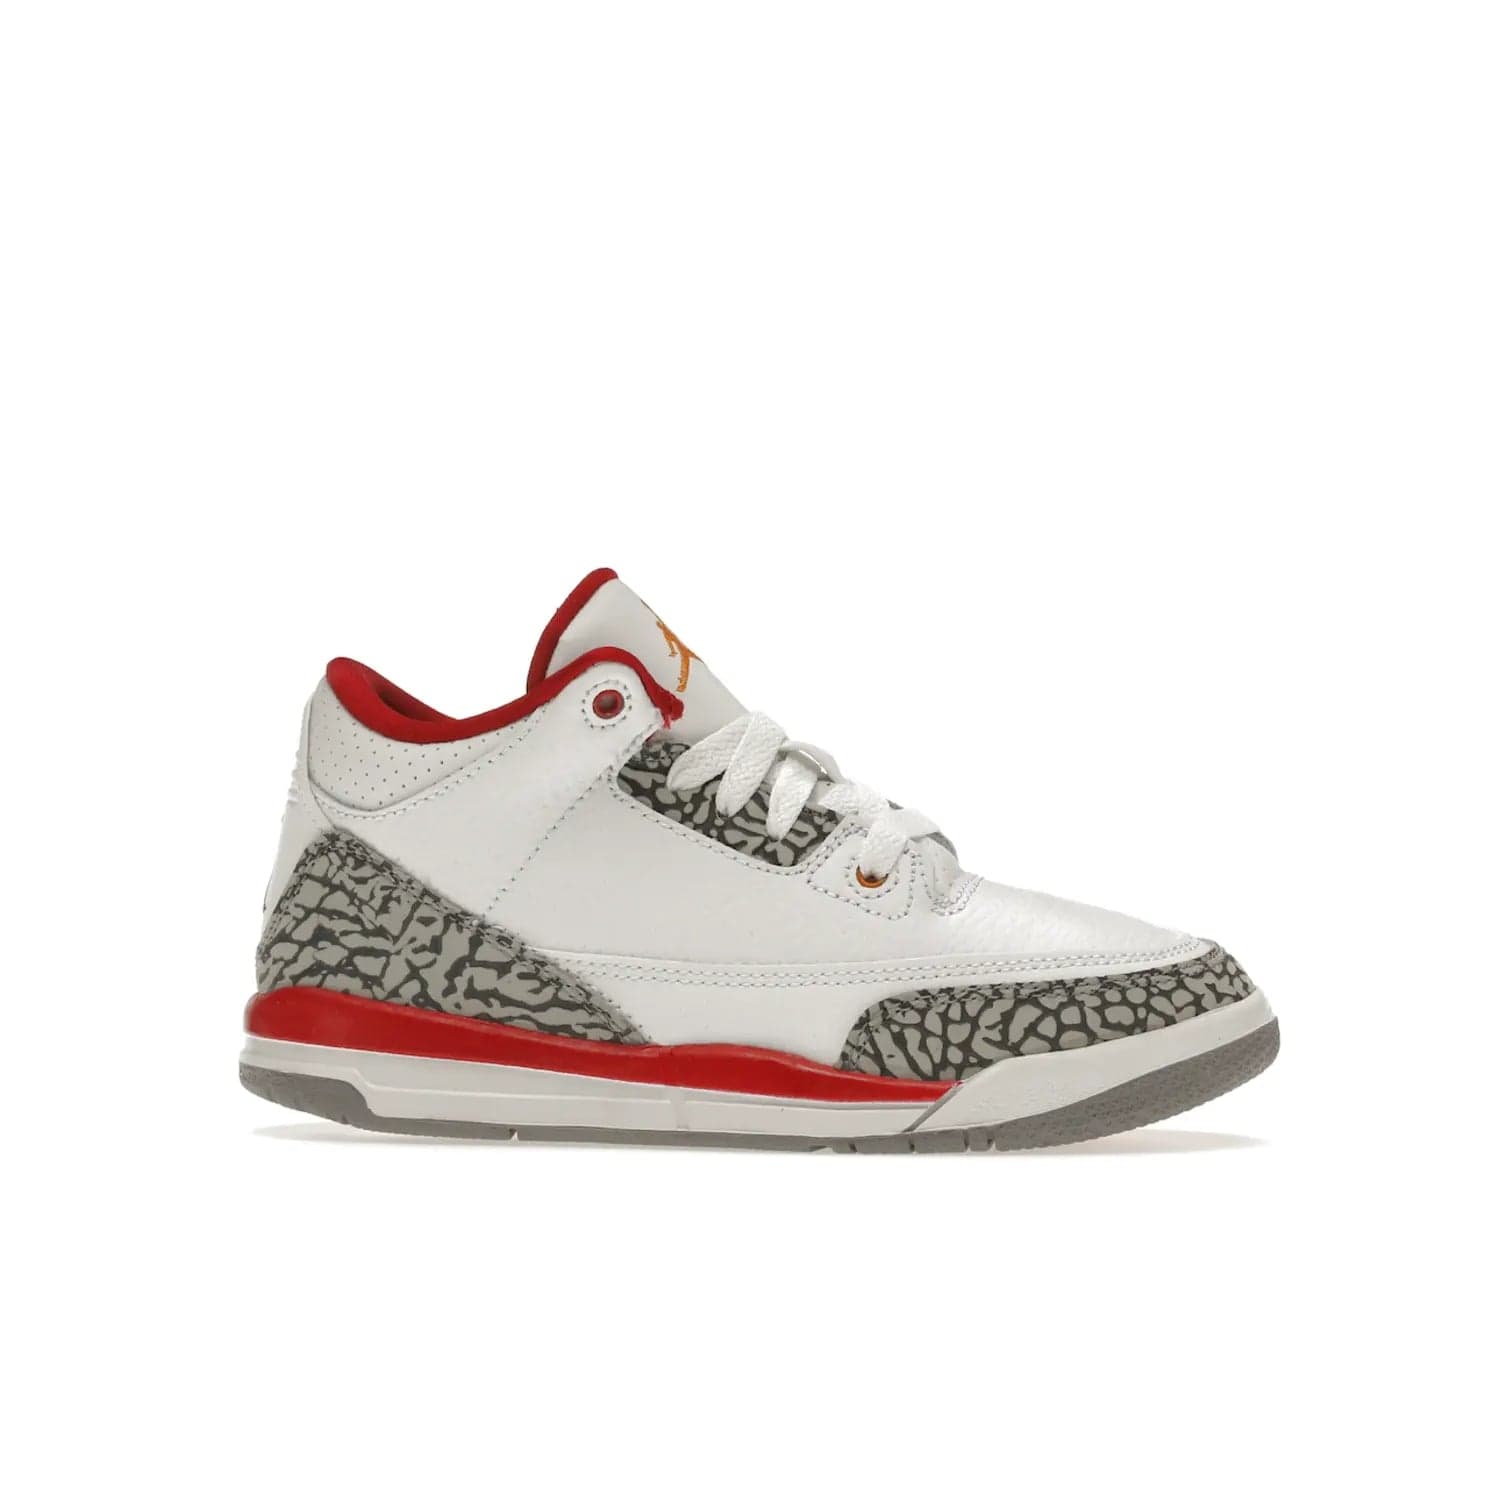 Jordan 3 Retro Cardinal (PS) - Image 2 - Only at www.BallersClubKickz.com - Add retro style to your sneaker collection with the Jordan 3 Retro Cardinal (PS). Featuring classic Jordan 3 details and colors of cardinal red, light curry, and cement grey. Available Feb. 2022.